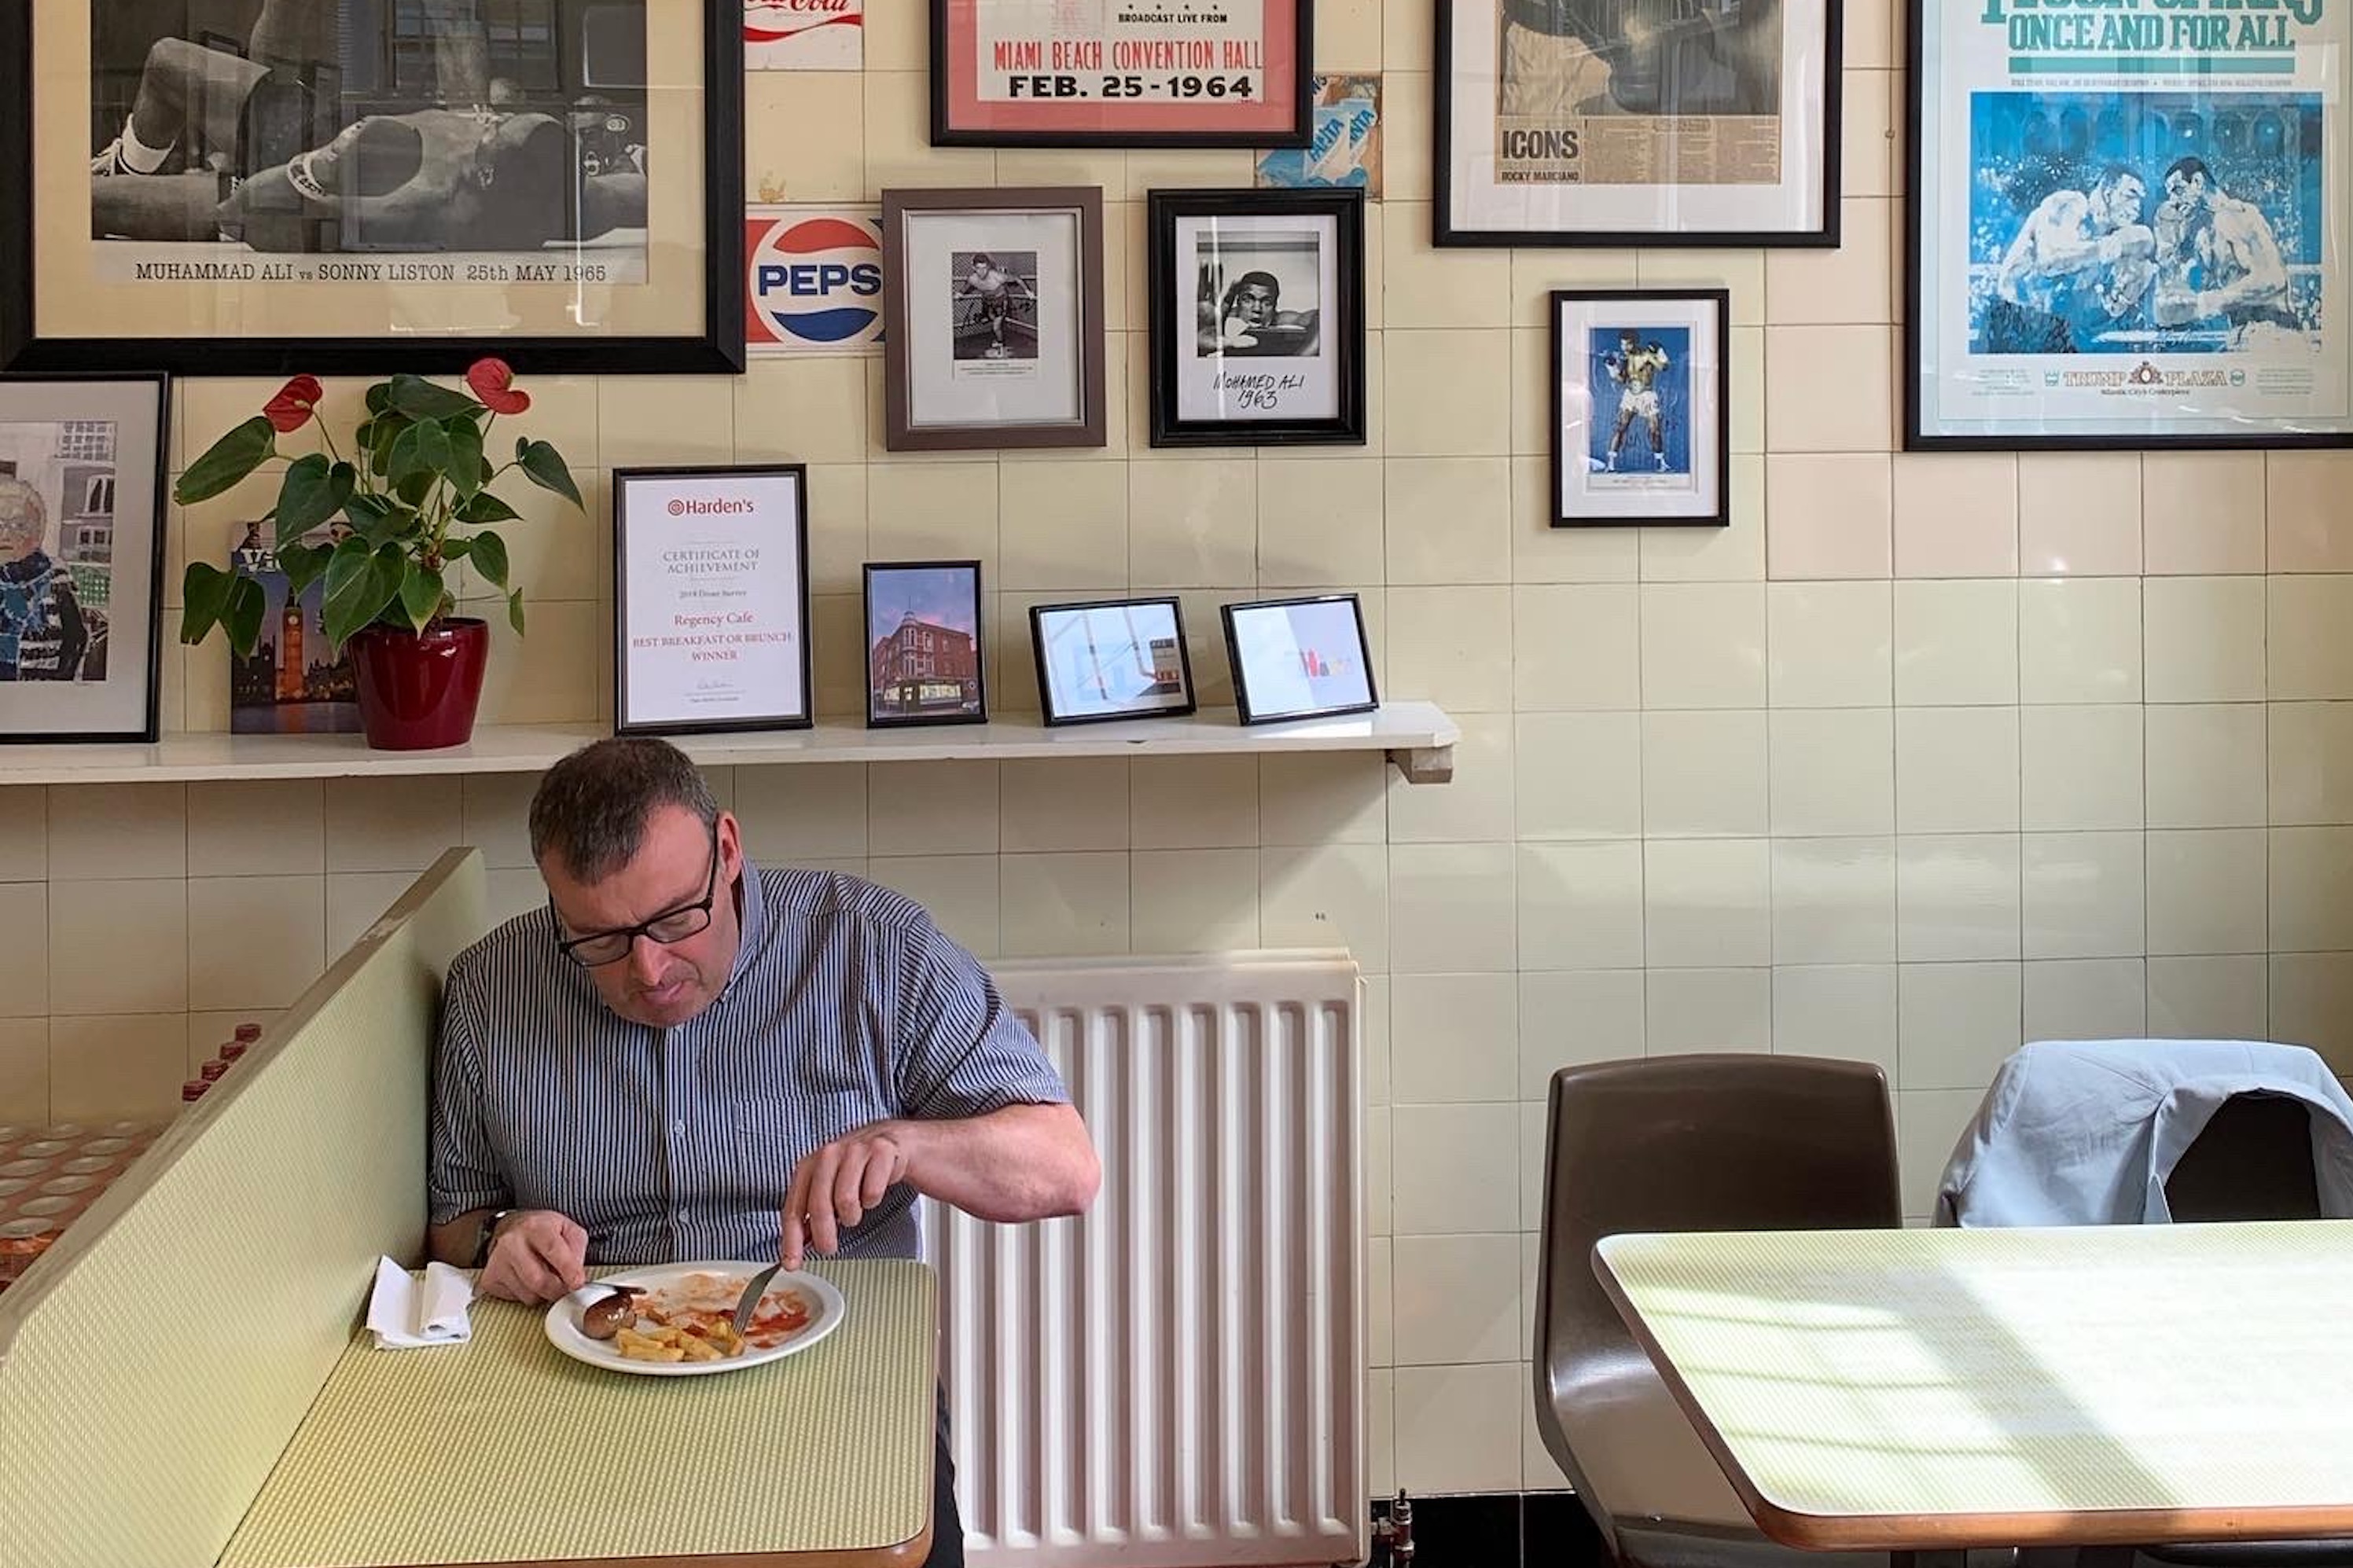 A man sits at a table in a London caff, eating a fry-up off a white plate. Behind him are posters and framed clippings from history.